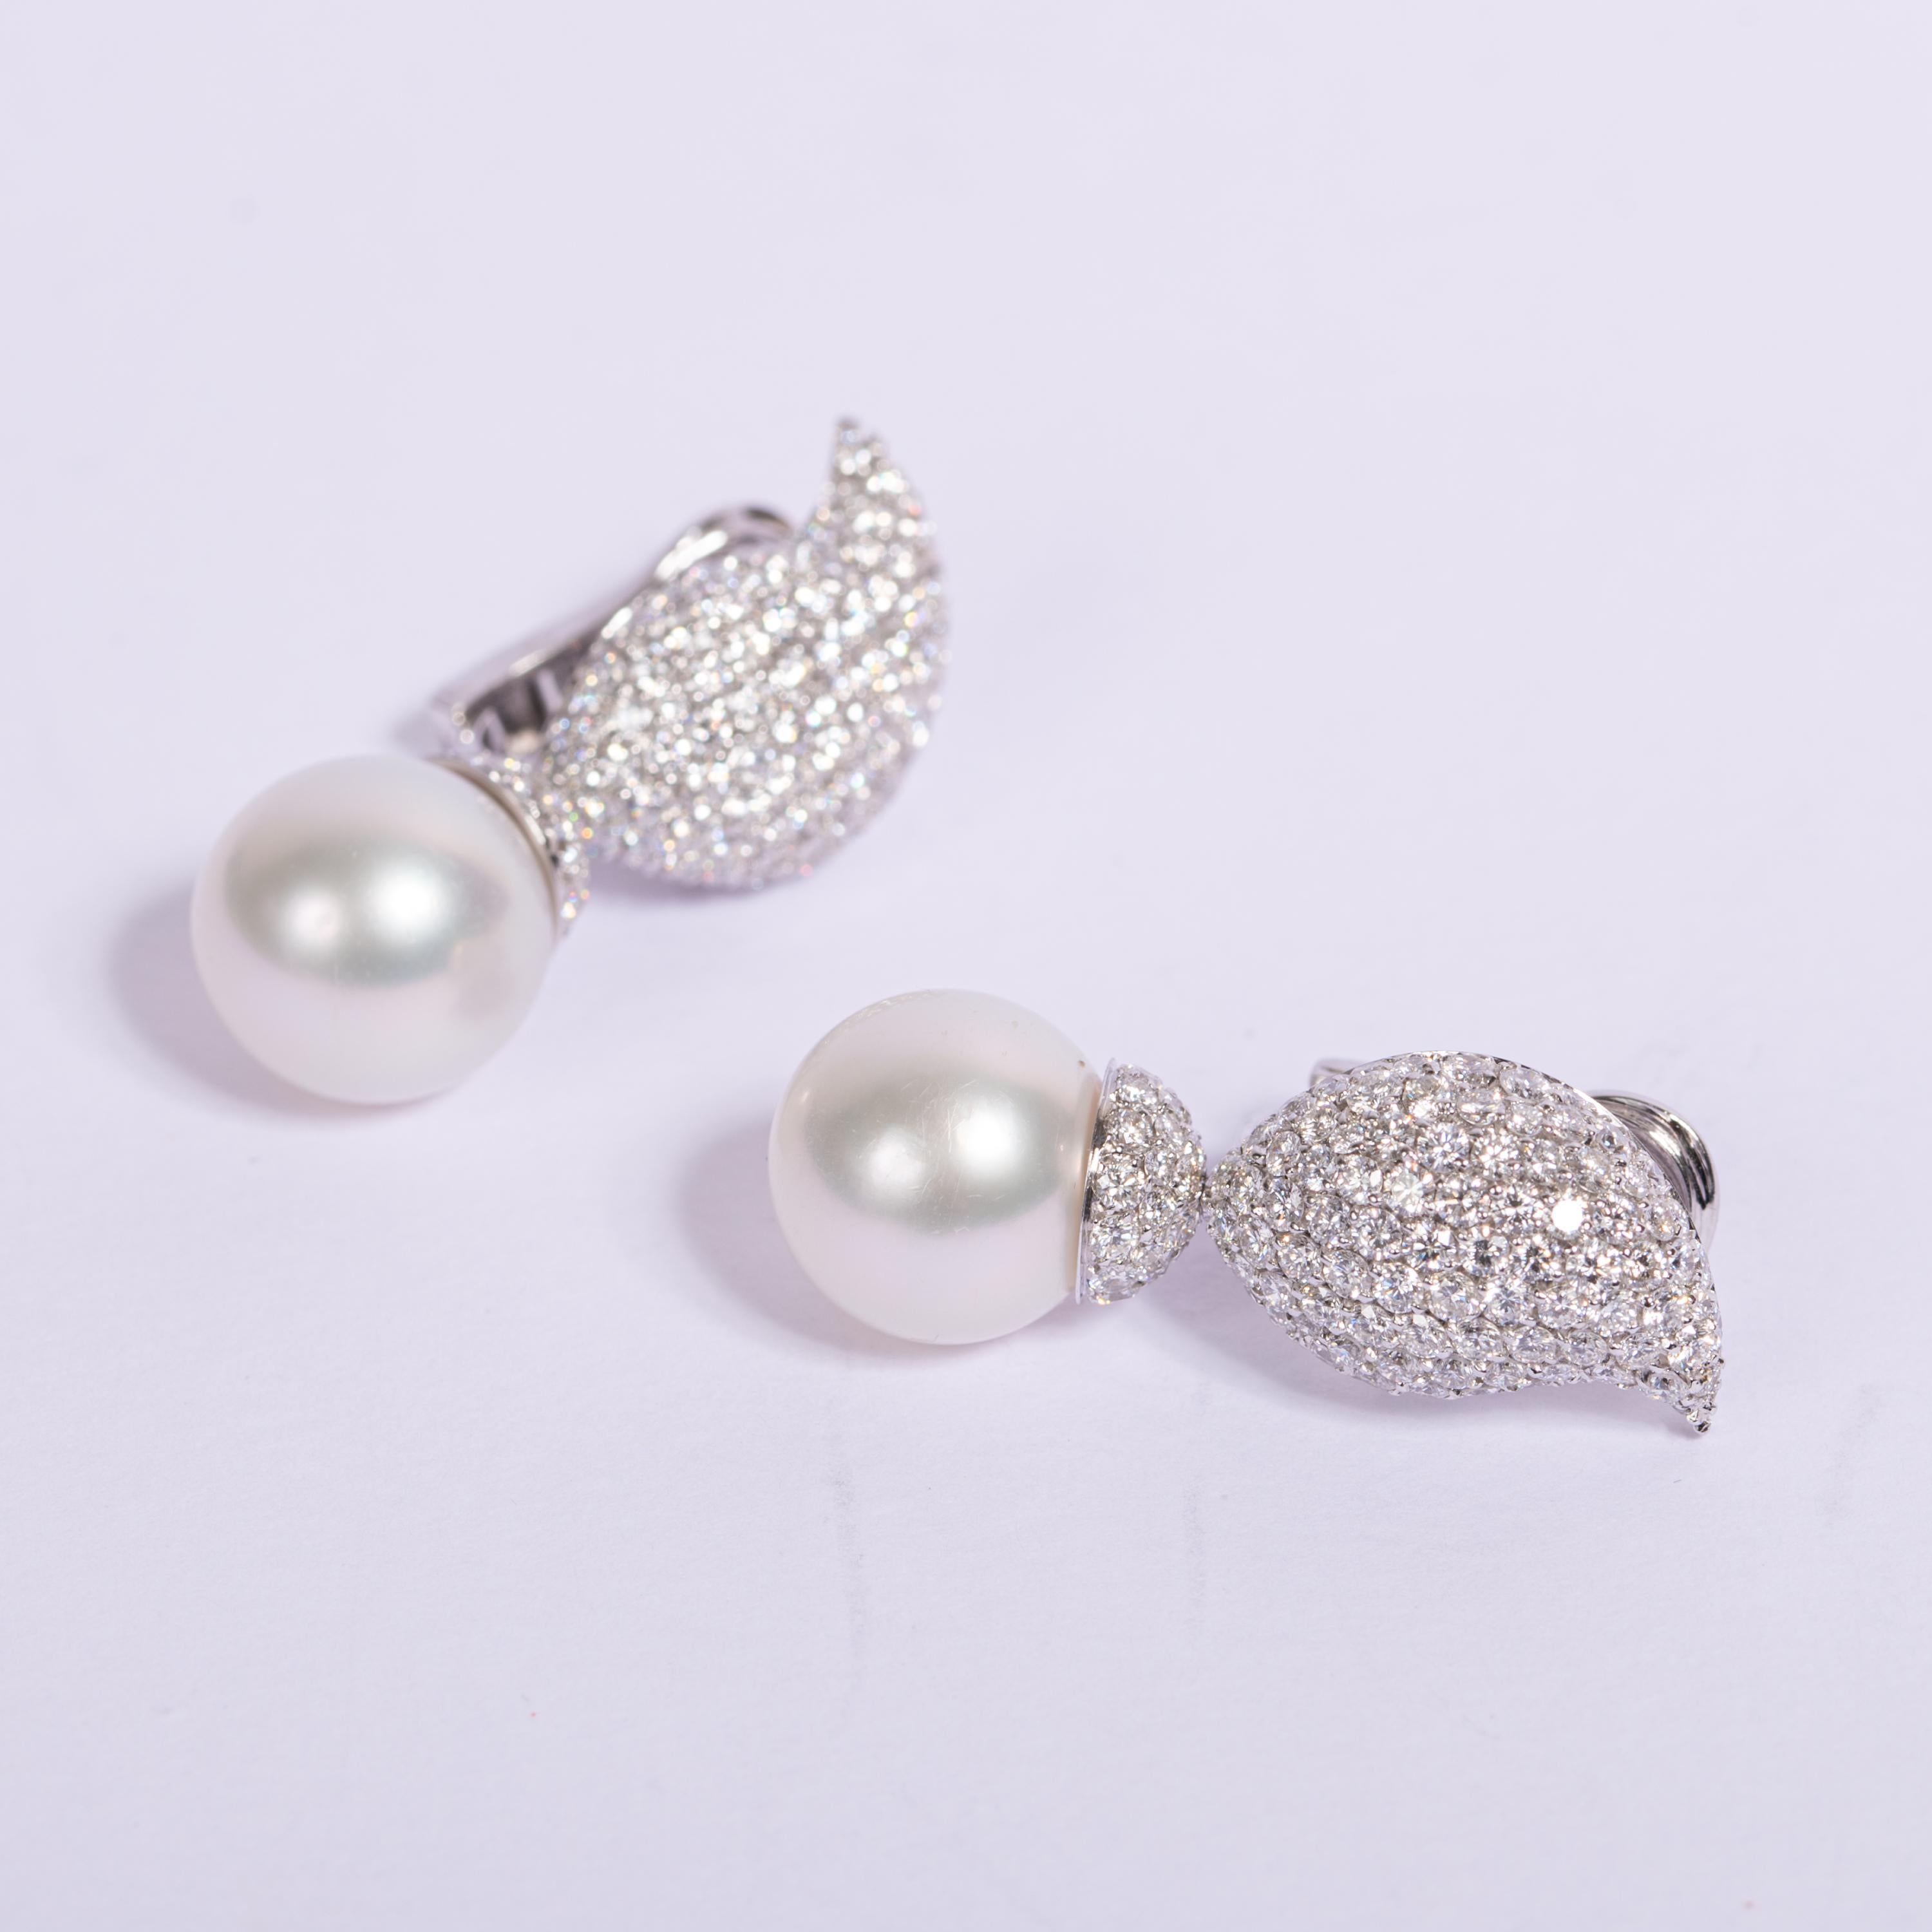 A fabulous Crivelli set of chic pearl and diamonds pave drop earrings with 5.14 carats of white brilliants cut diamonds F/G color, over the entire surface of the drop for maximum sparkle! the diameter of the pearl is 12 carat 26.9.

14 gr